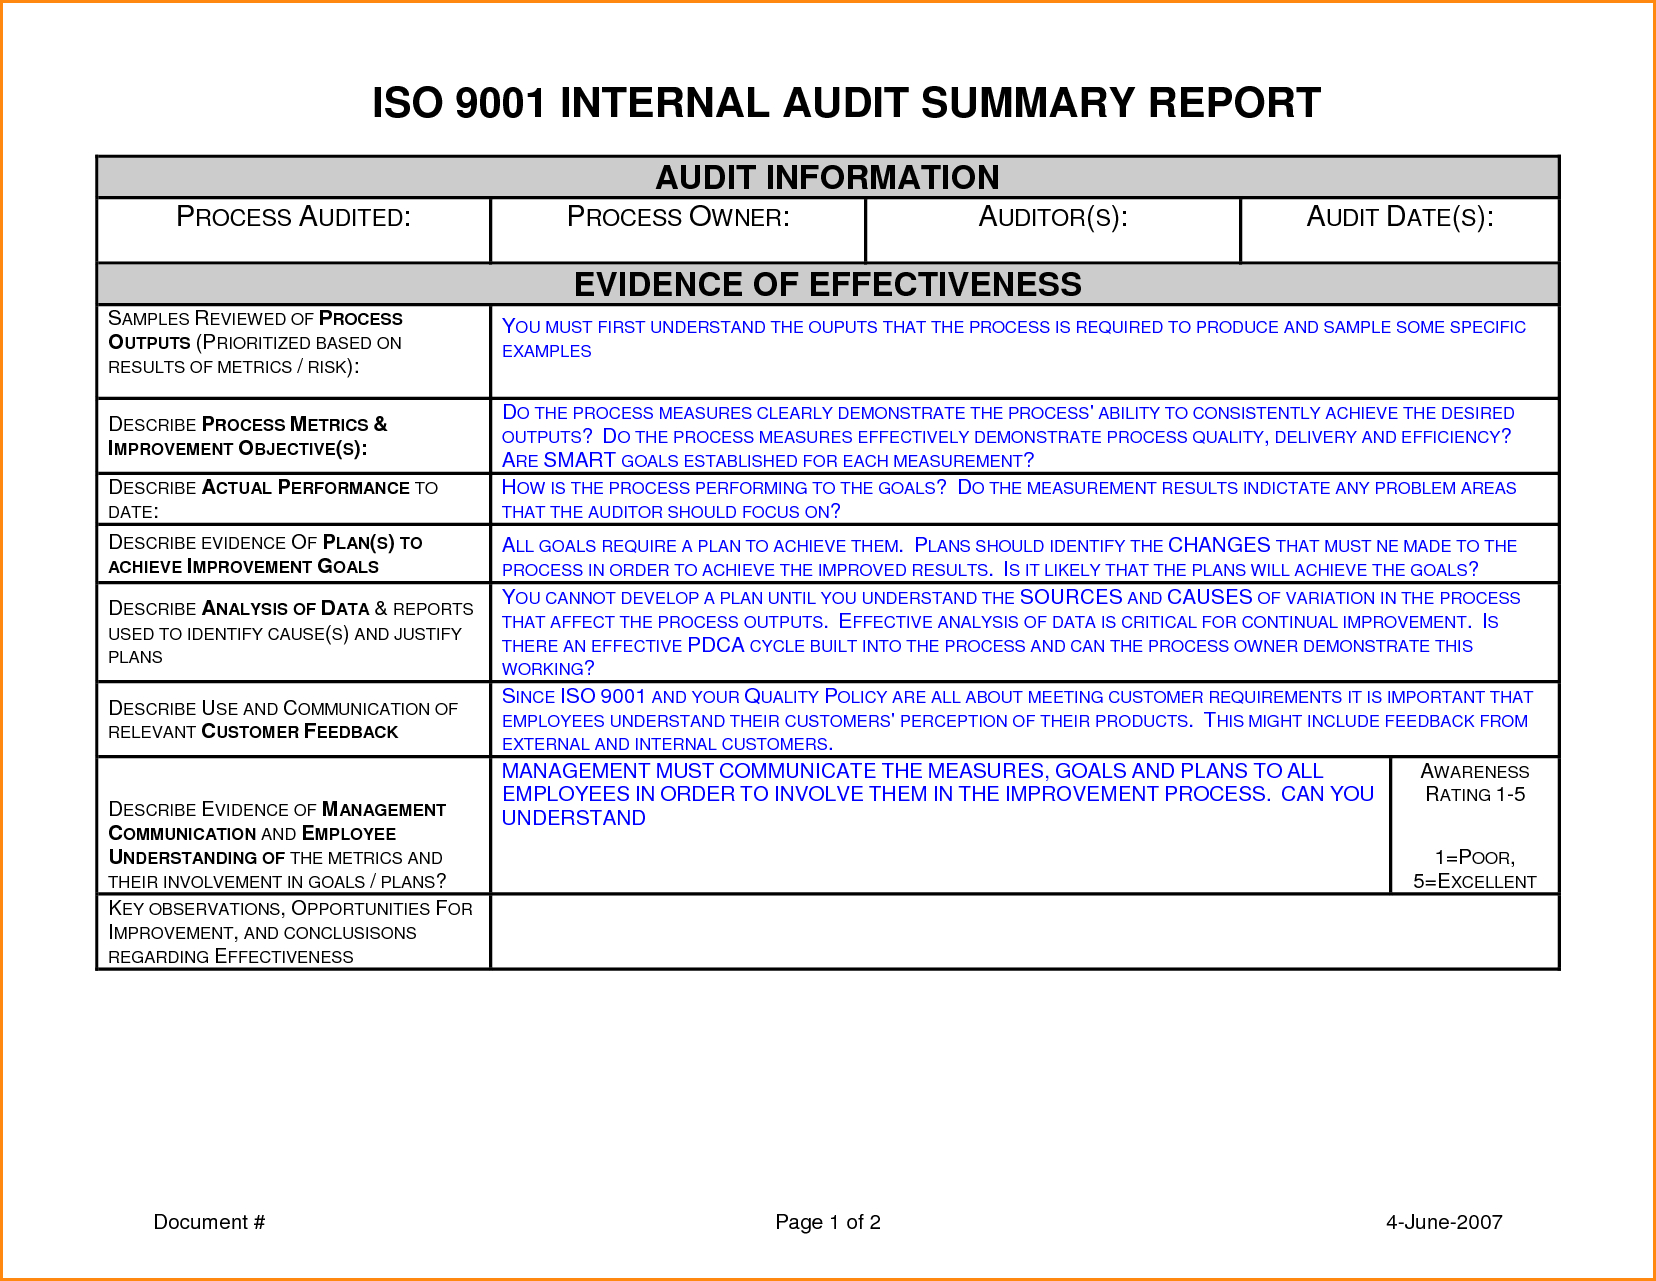 Internal Audit Report Template Iso 9001 12 Important Facts In Iso 9001 Internal Audit Report Template